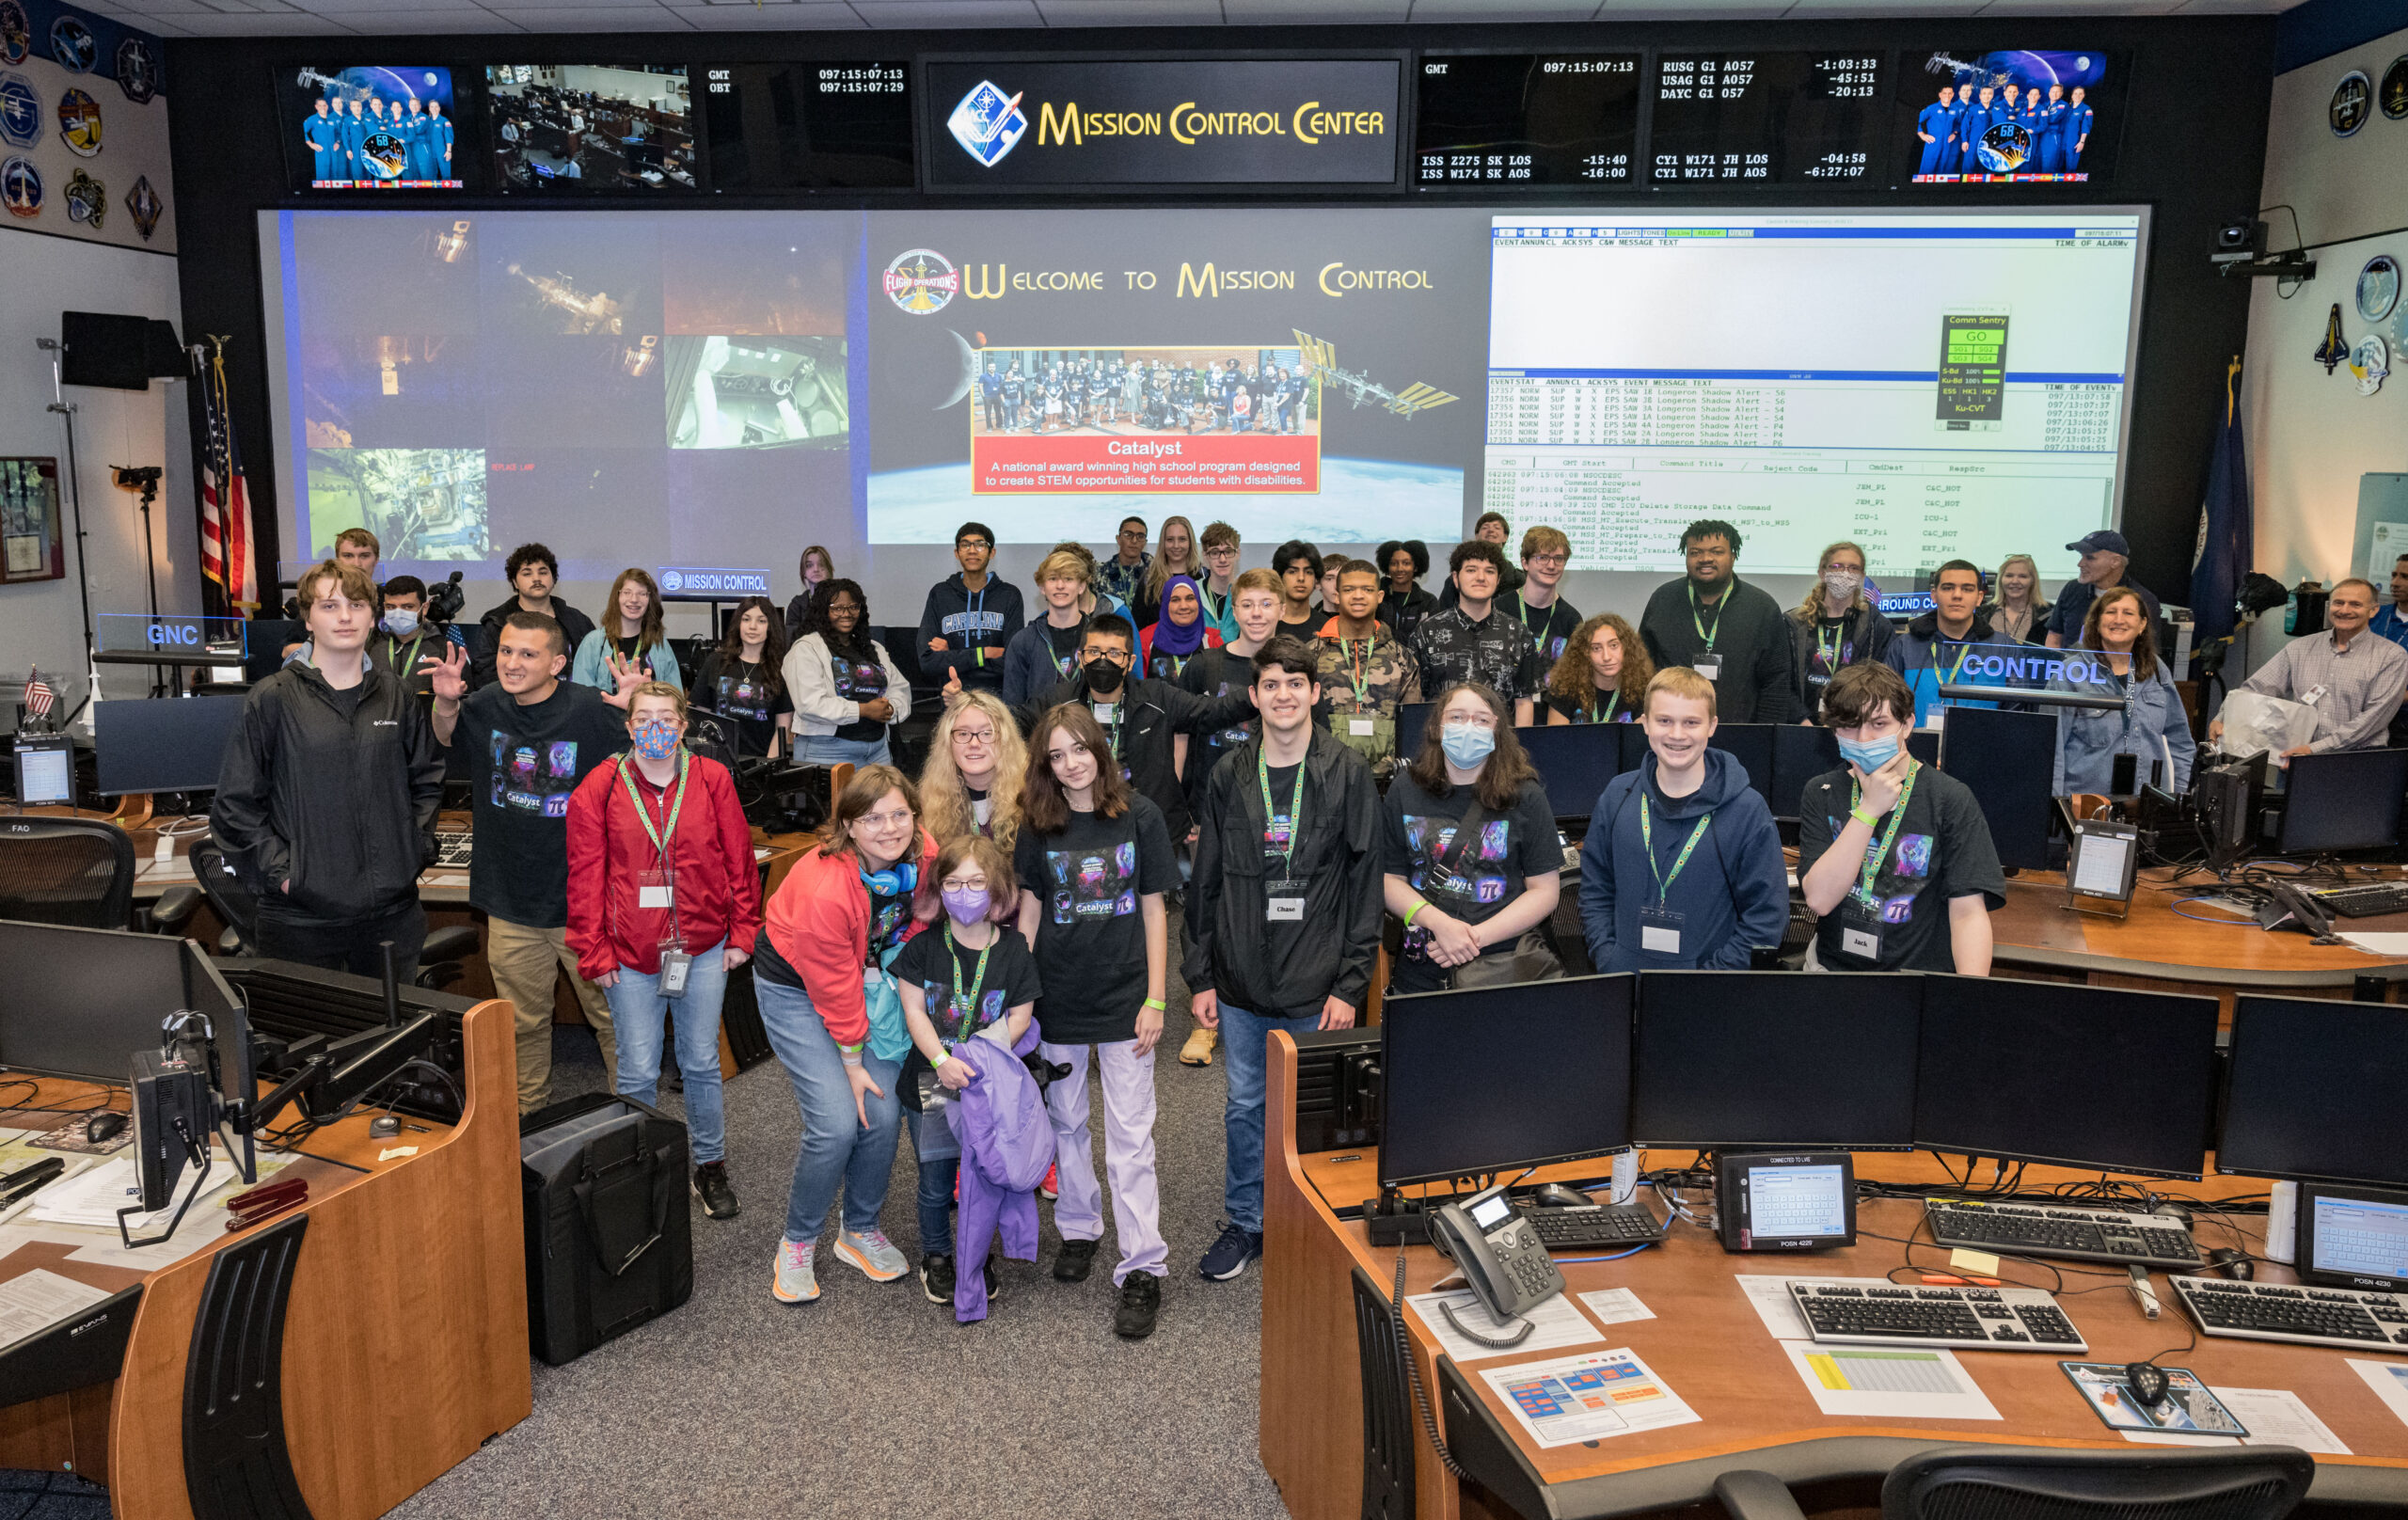 Image portray a group of students participating in the Catalyst program at NASA.